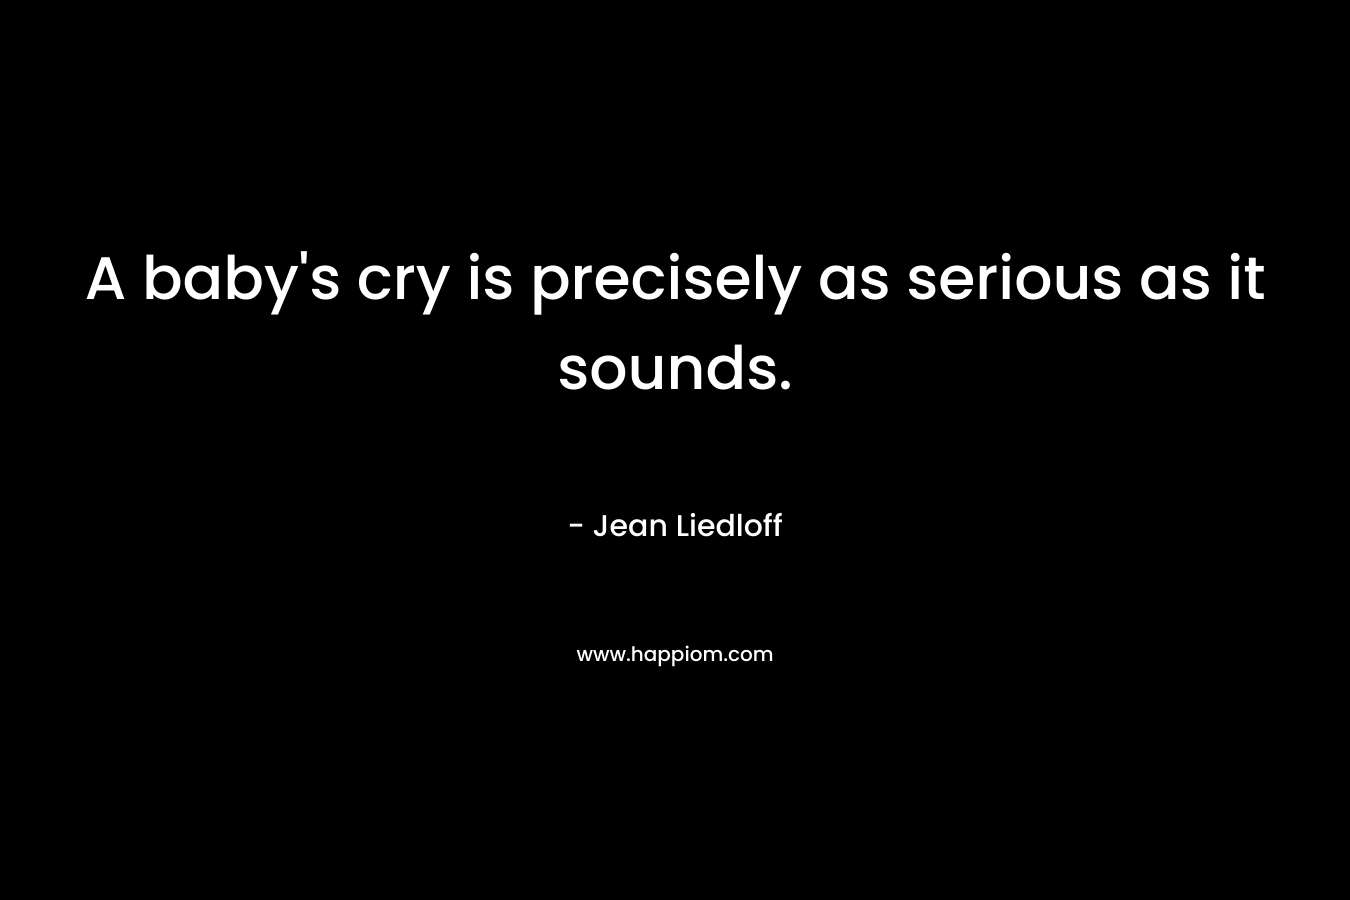 A baby’s cry is precisely as serious as it sounds. – Jean Liedloff